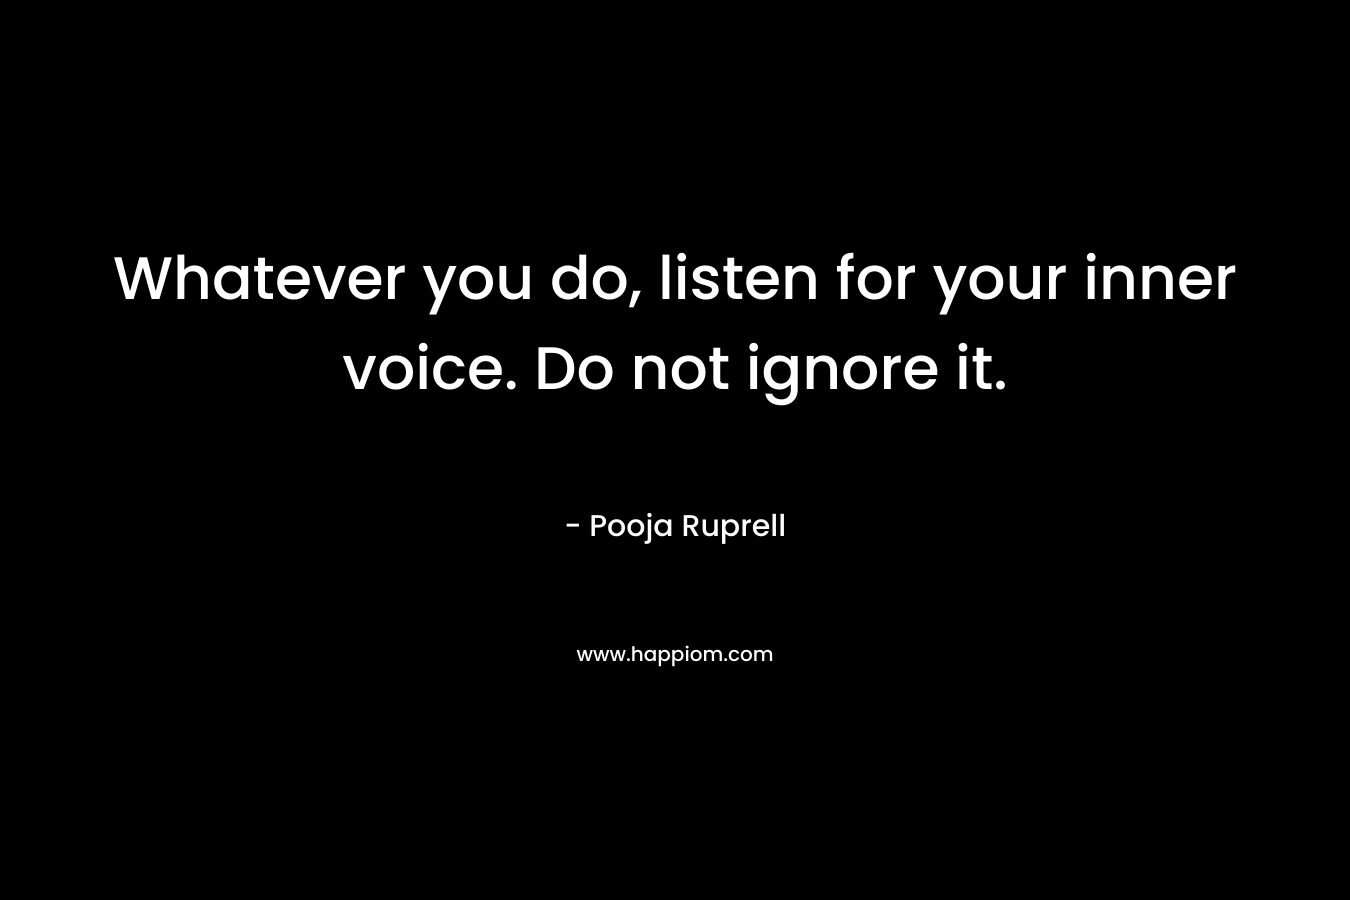 Whatever you do, listen for your inner voice. Do not ignore it.